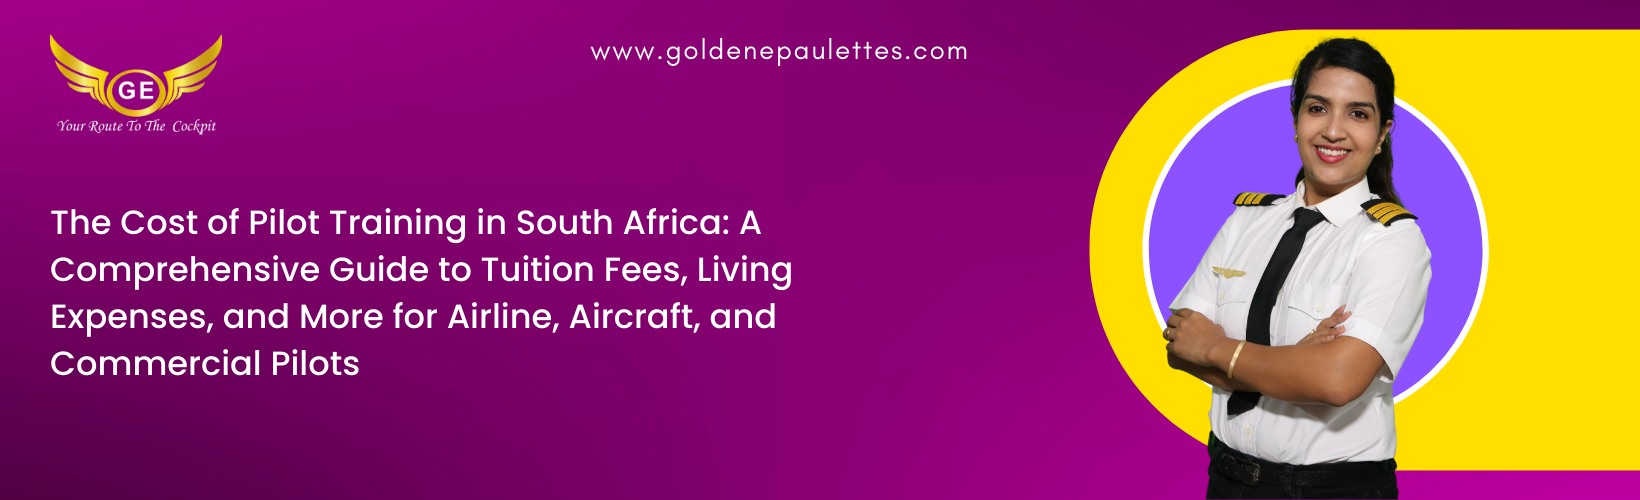 The Cost of Pilot Training in South Africa